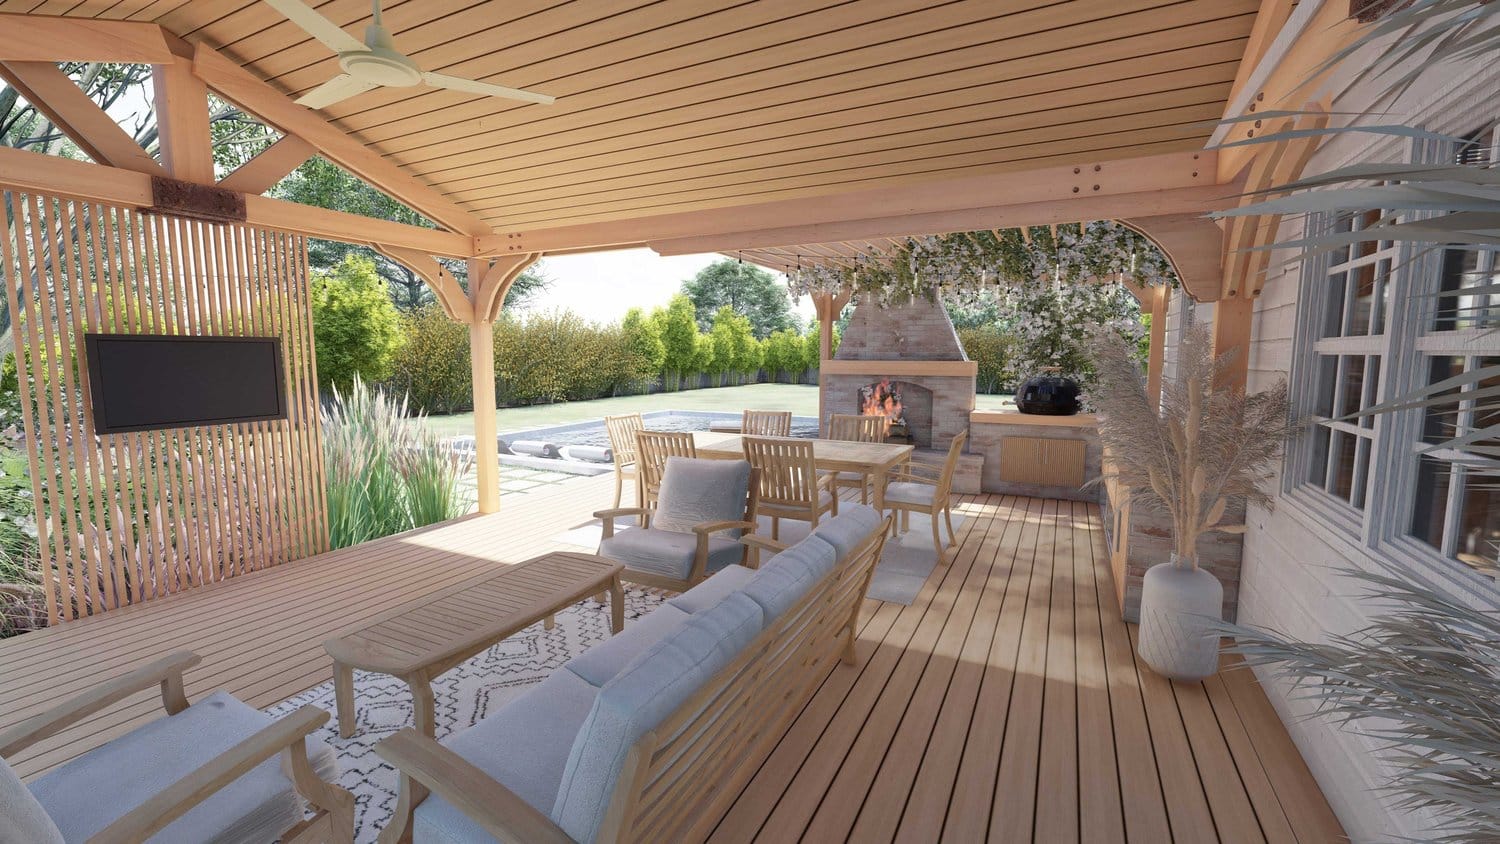 Charlotte patio with pergola over lounging and dining area, with an outdoor fire pit